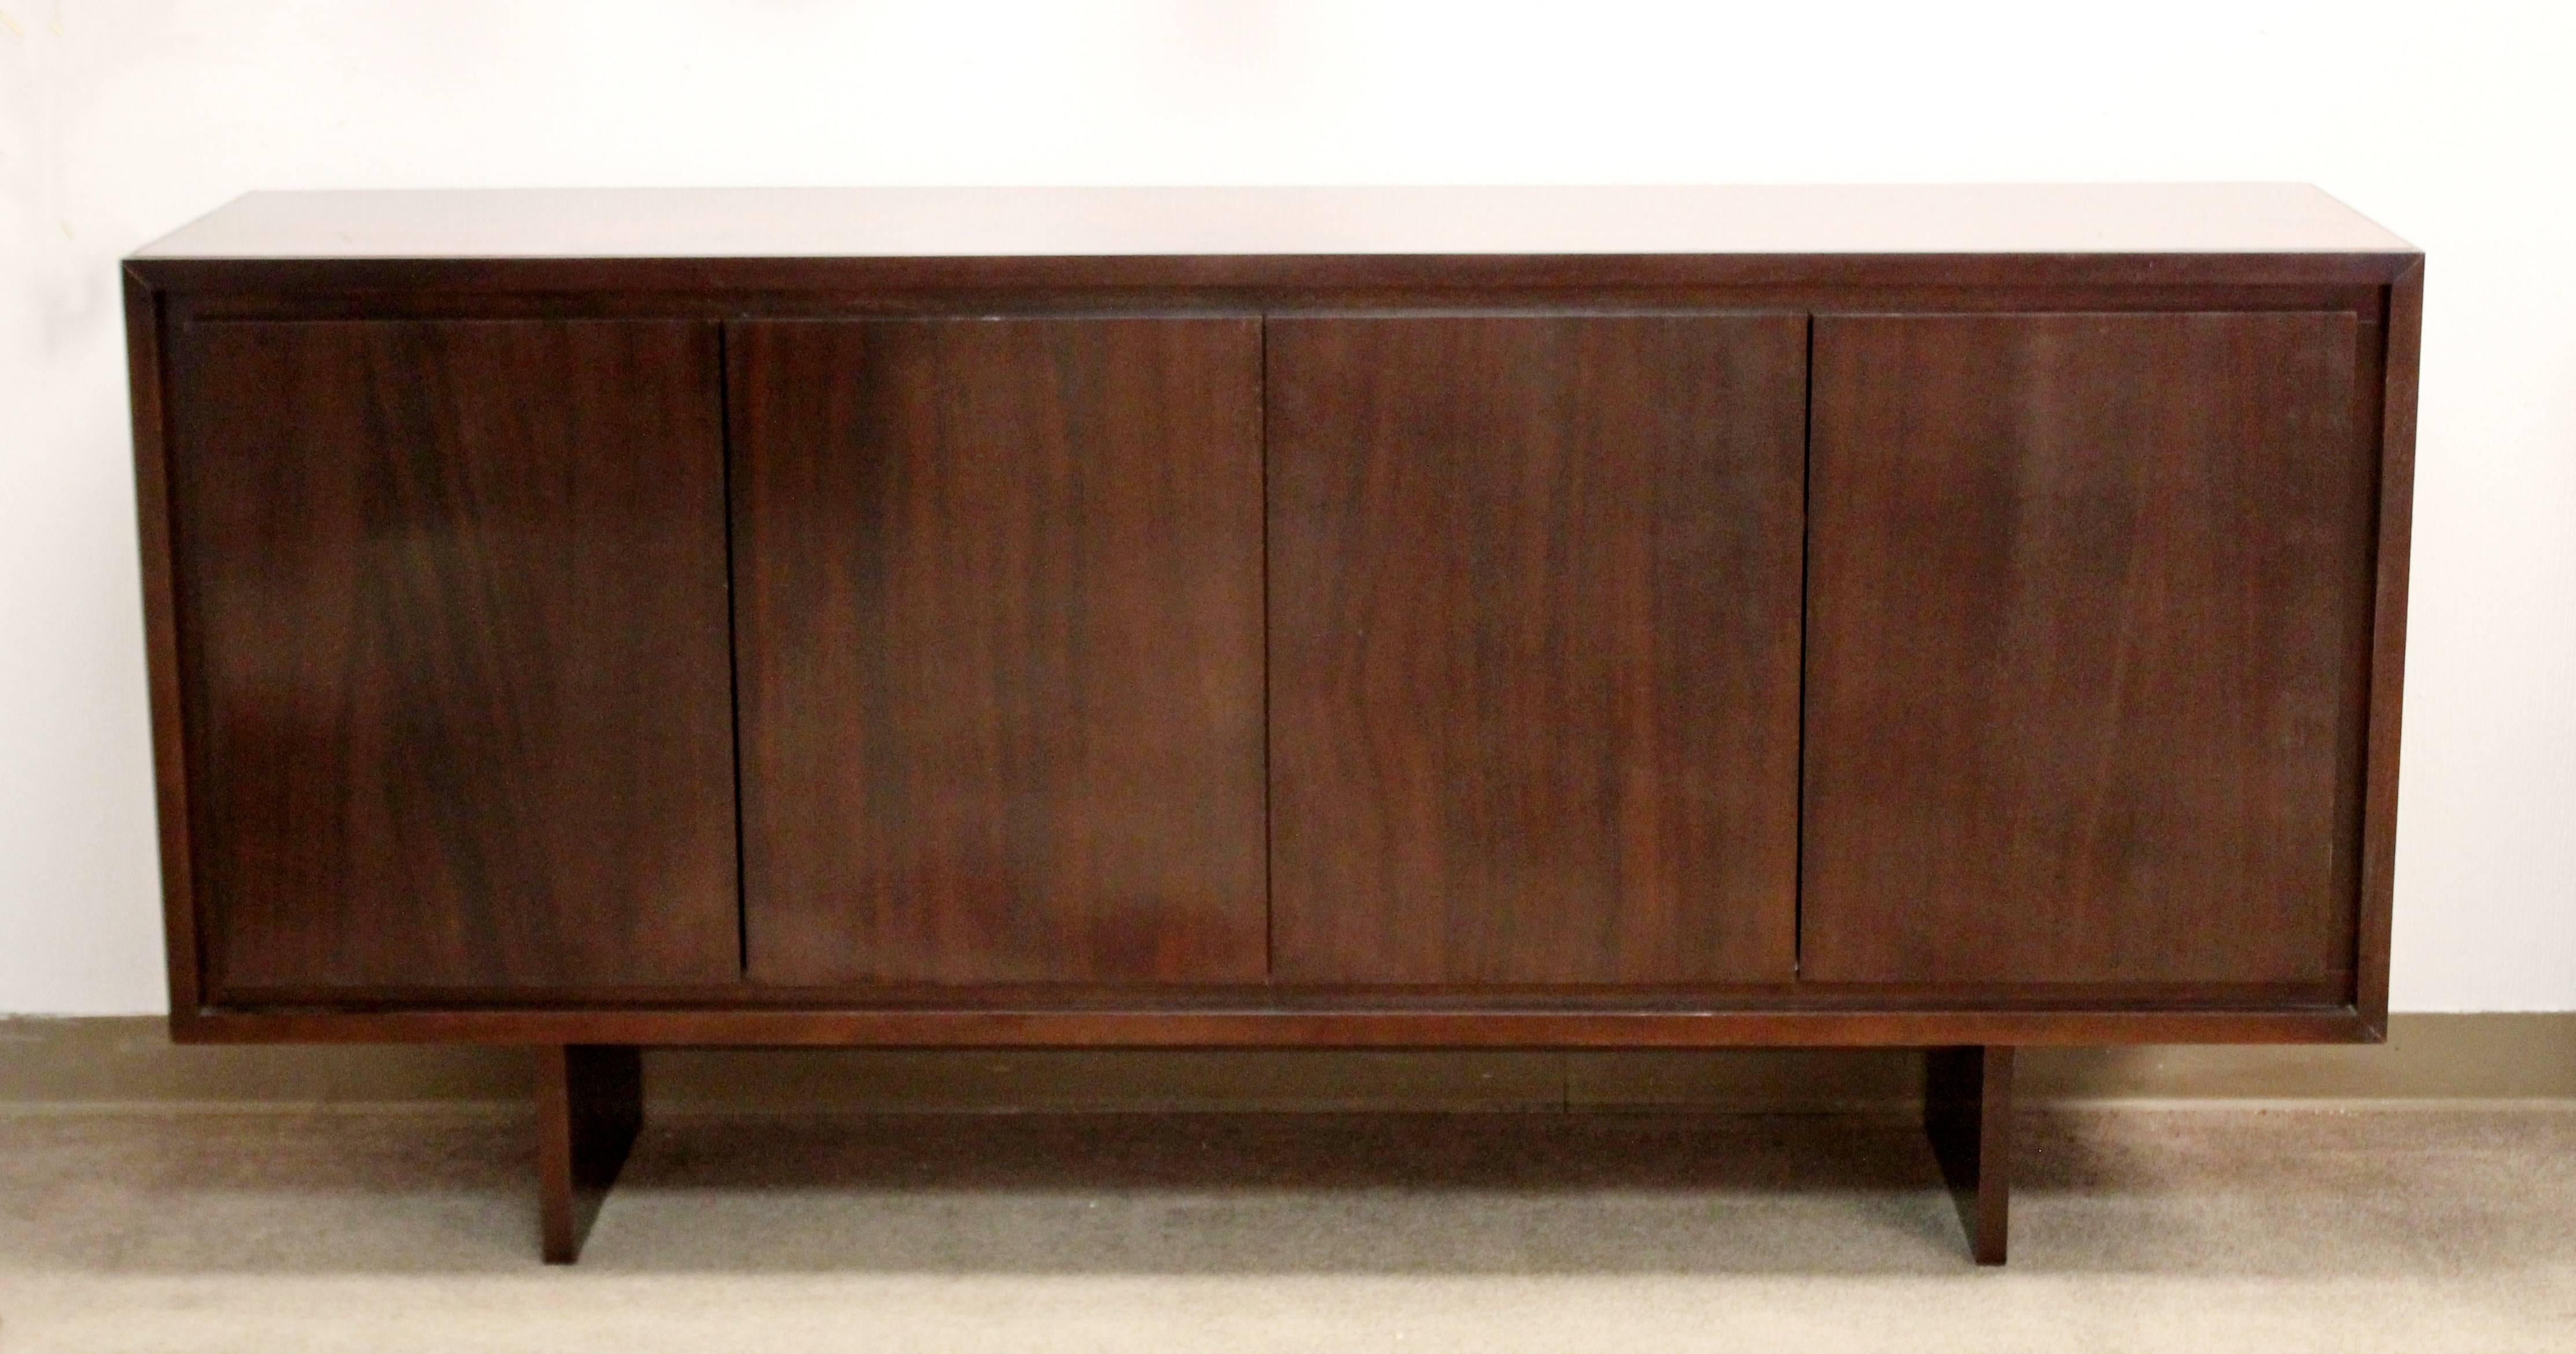 For your consideration is a fantastic, large credenza, with a rare red granite top, and two shelves, custom-made in the style of Baker. In excellent condition. The dimensions are 75.5